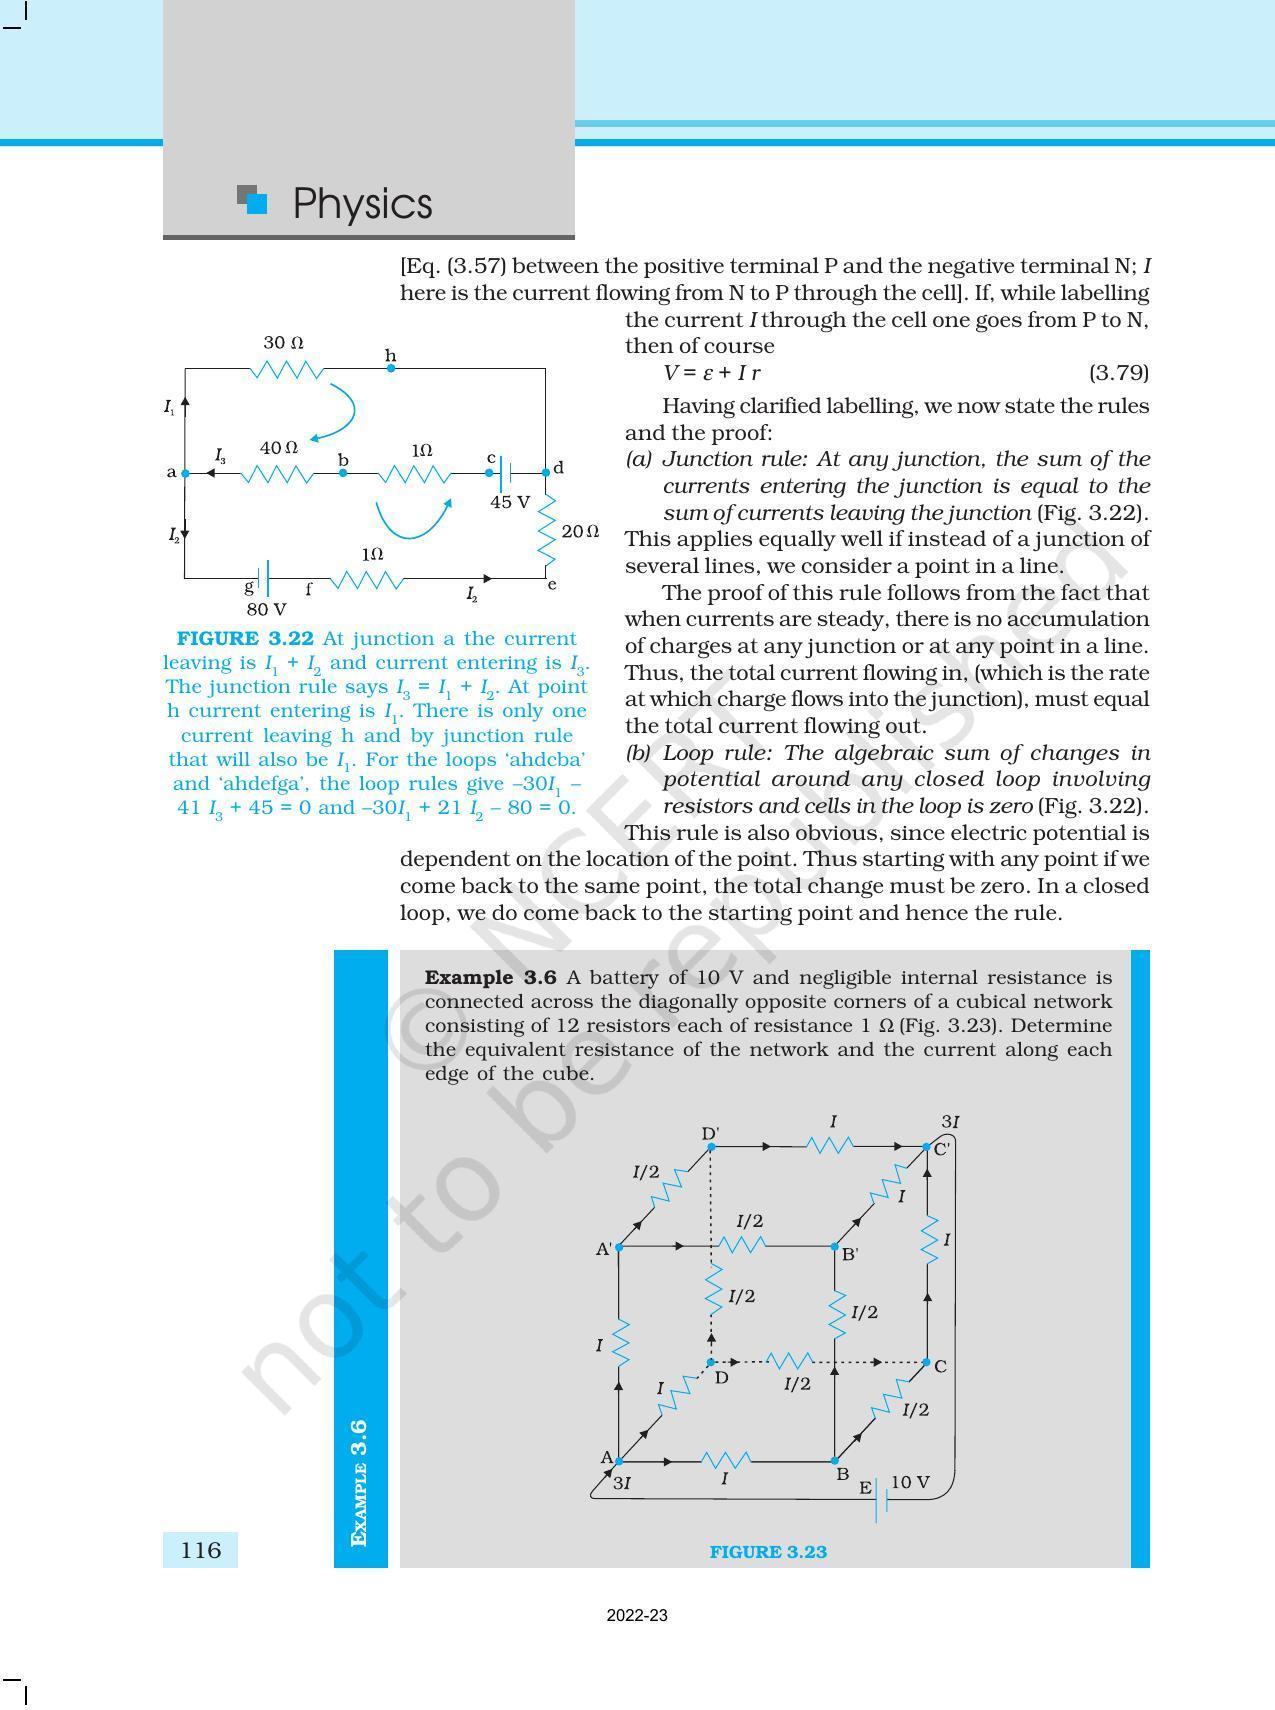 NCERT Book for Class 12 Physics Chapter 3 Current Electricity - Page 24